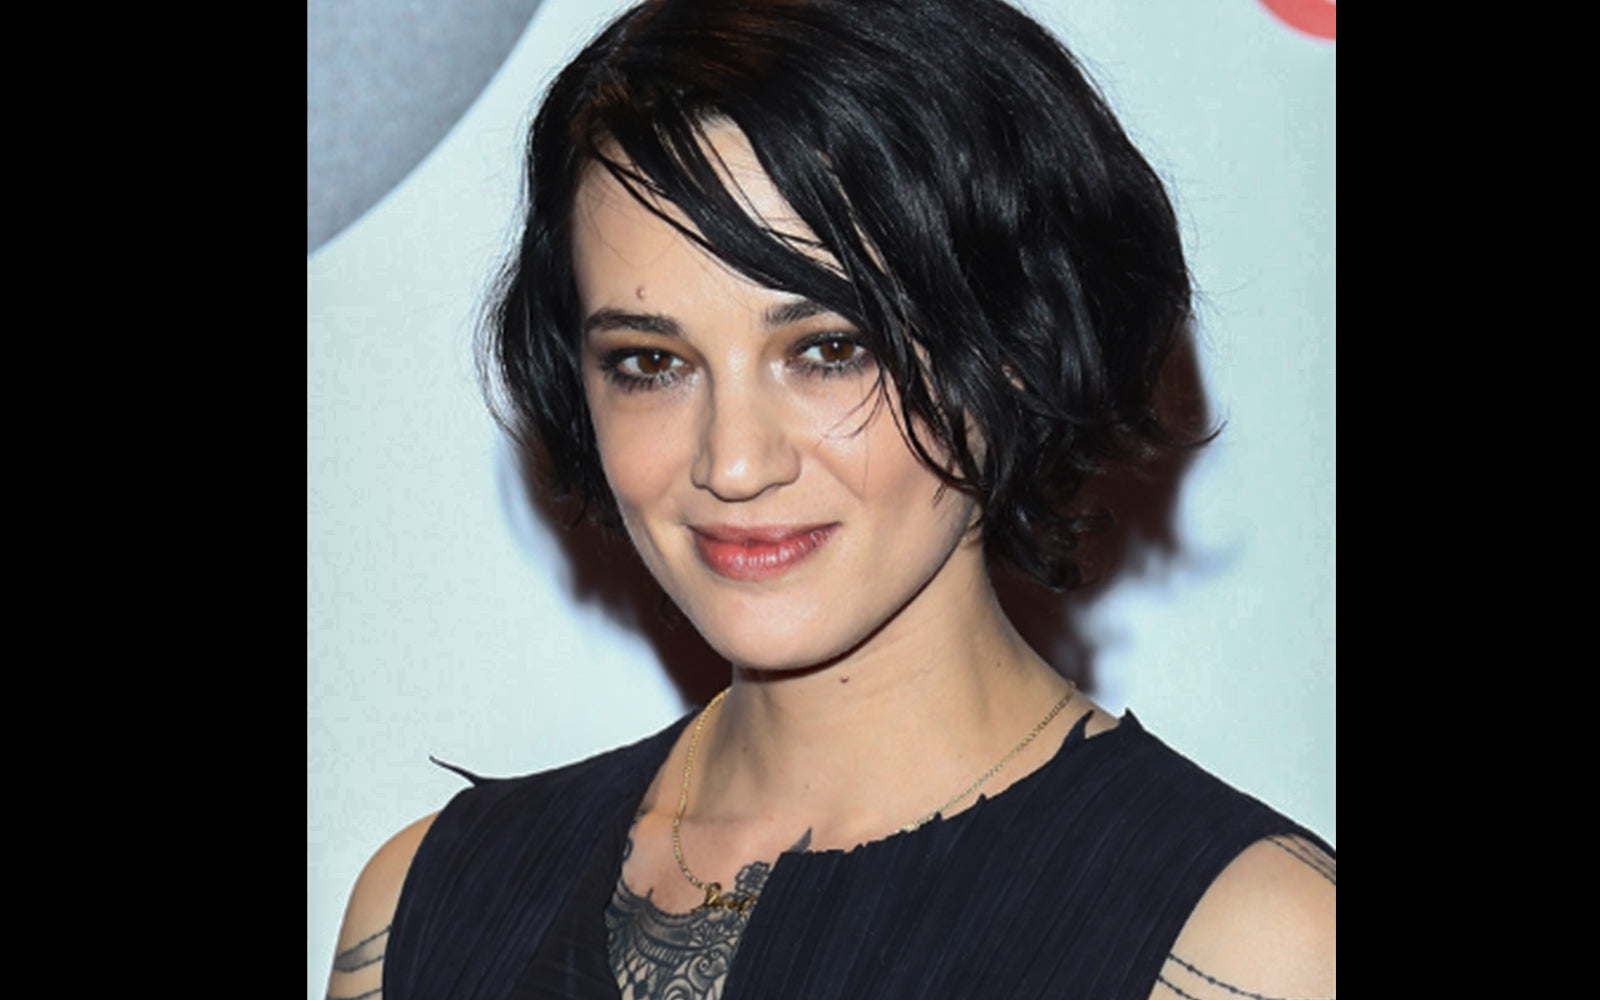 ASIA ARGENTO ON THE “HUNTING GROUNDS”